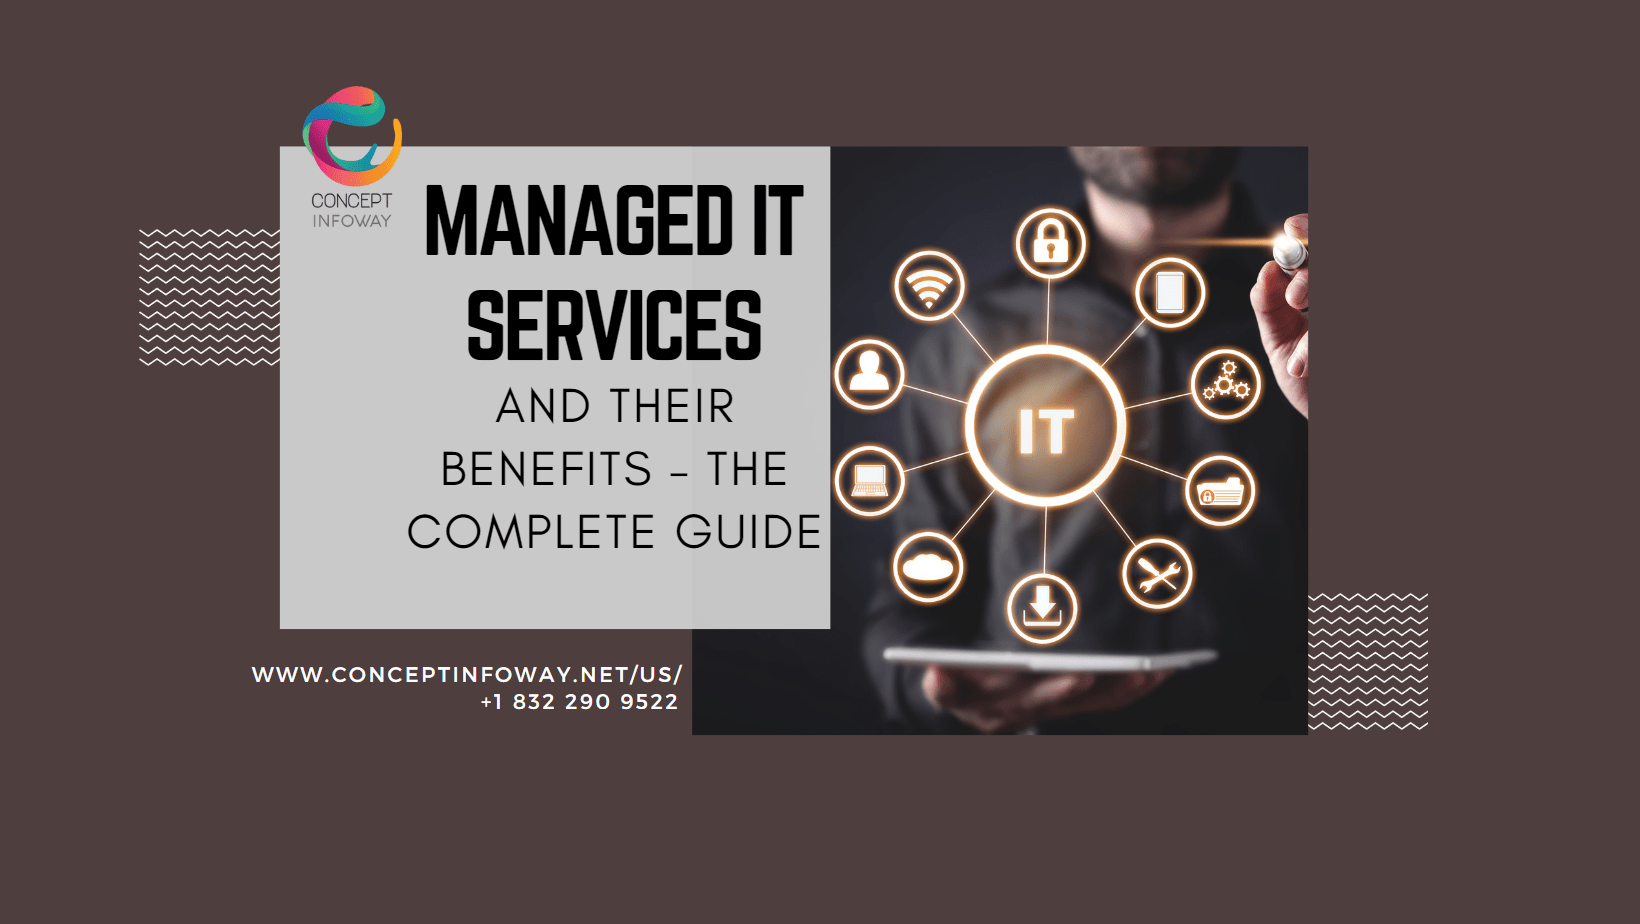 Managed IT Services - Concept Infoway LLC